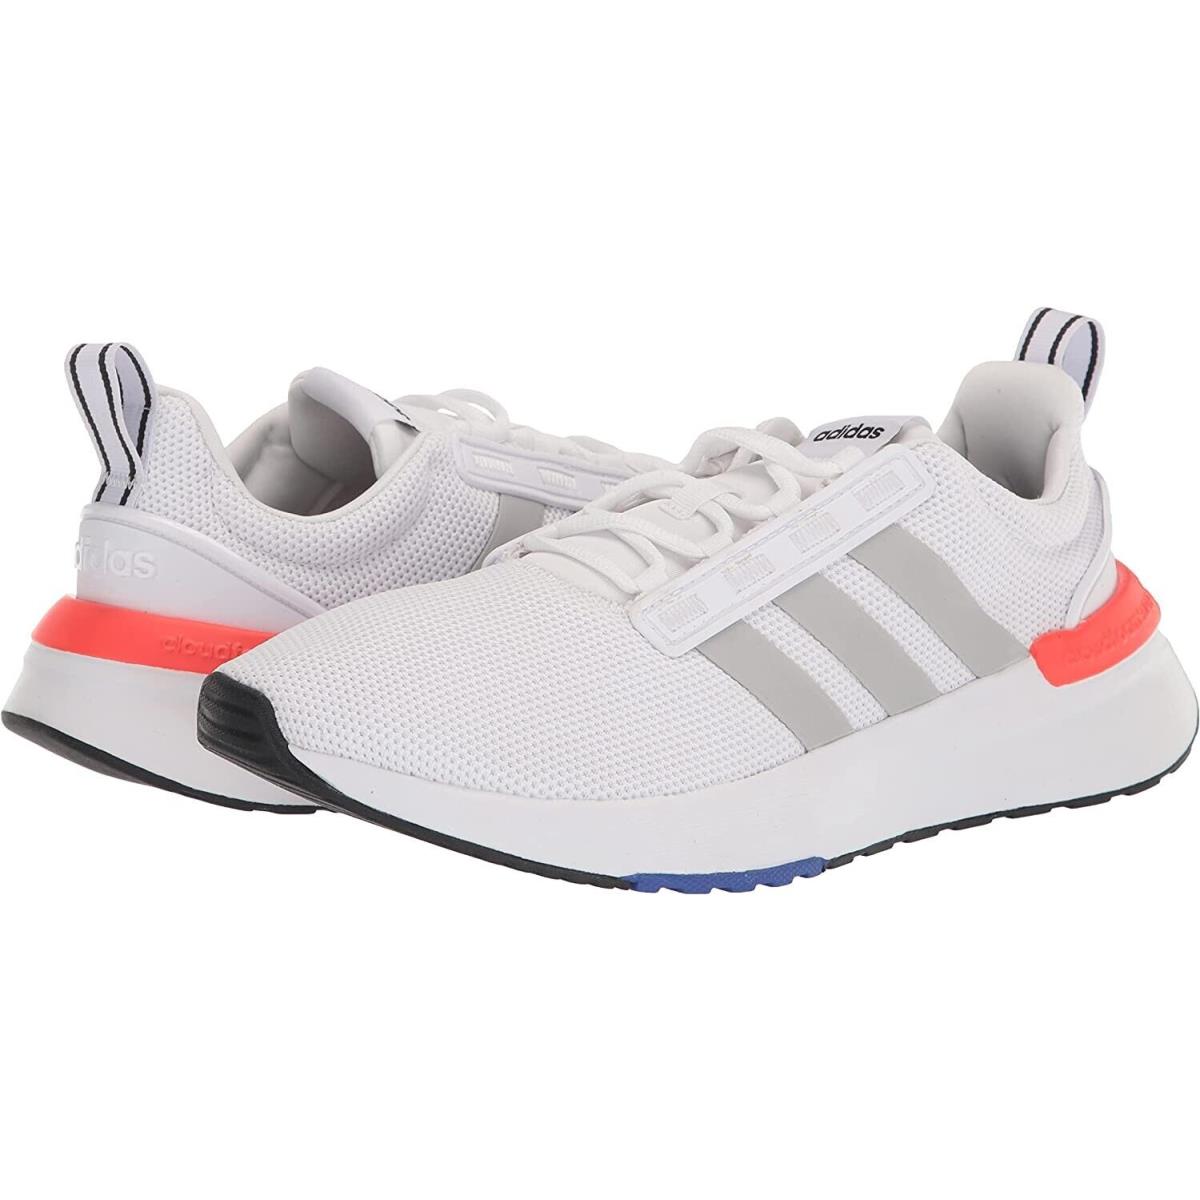 Adidas Racer TR21 Wide Shoes White Grey Red Men`s Size 10.5 GX8131